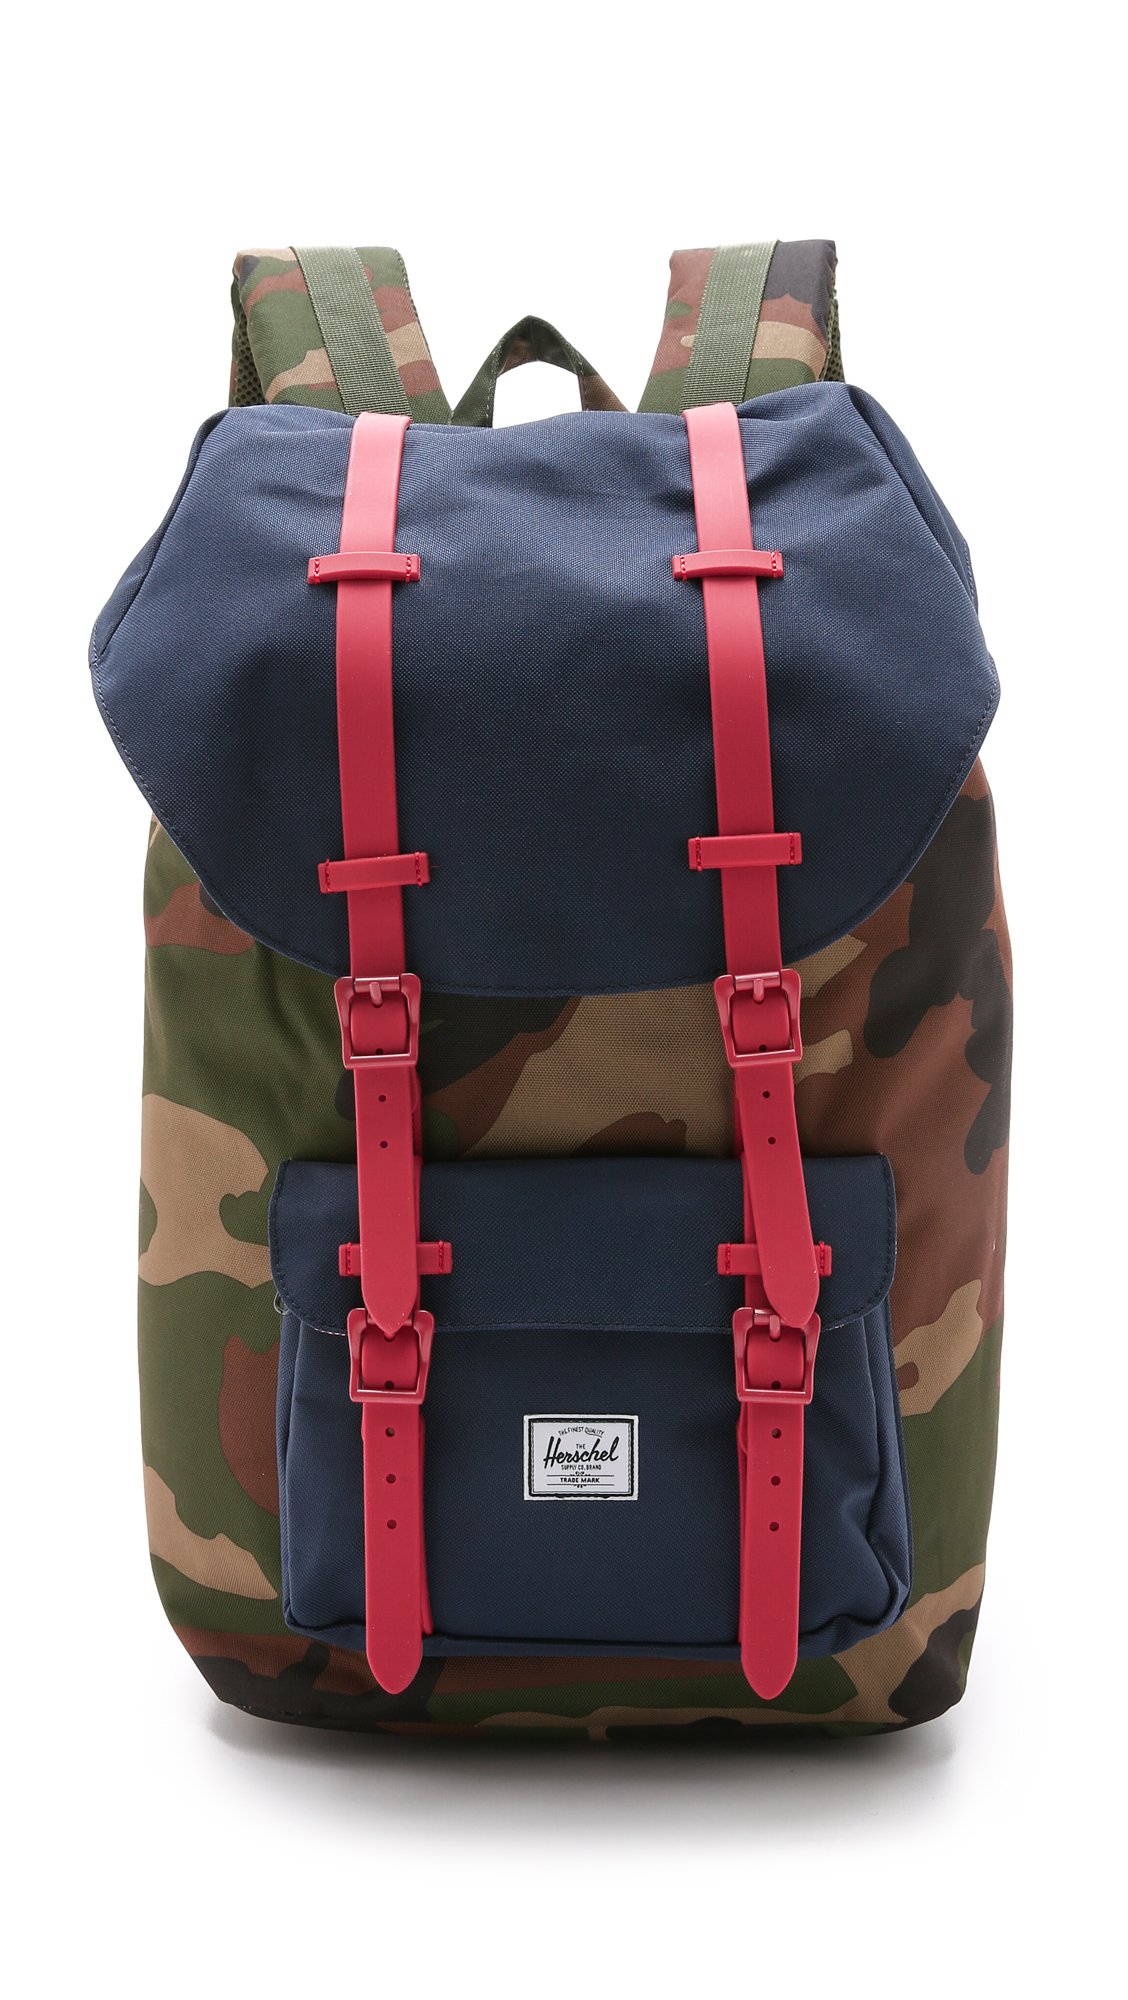 Herschel Supply Co. Little America Backpack - Woodland Camo/Navy/Red in  Green | Lyst